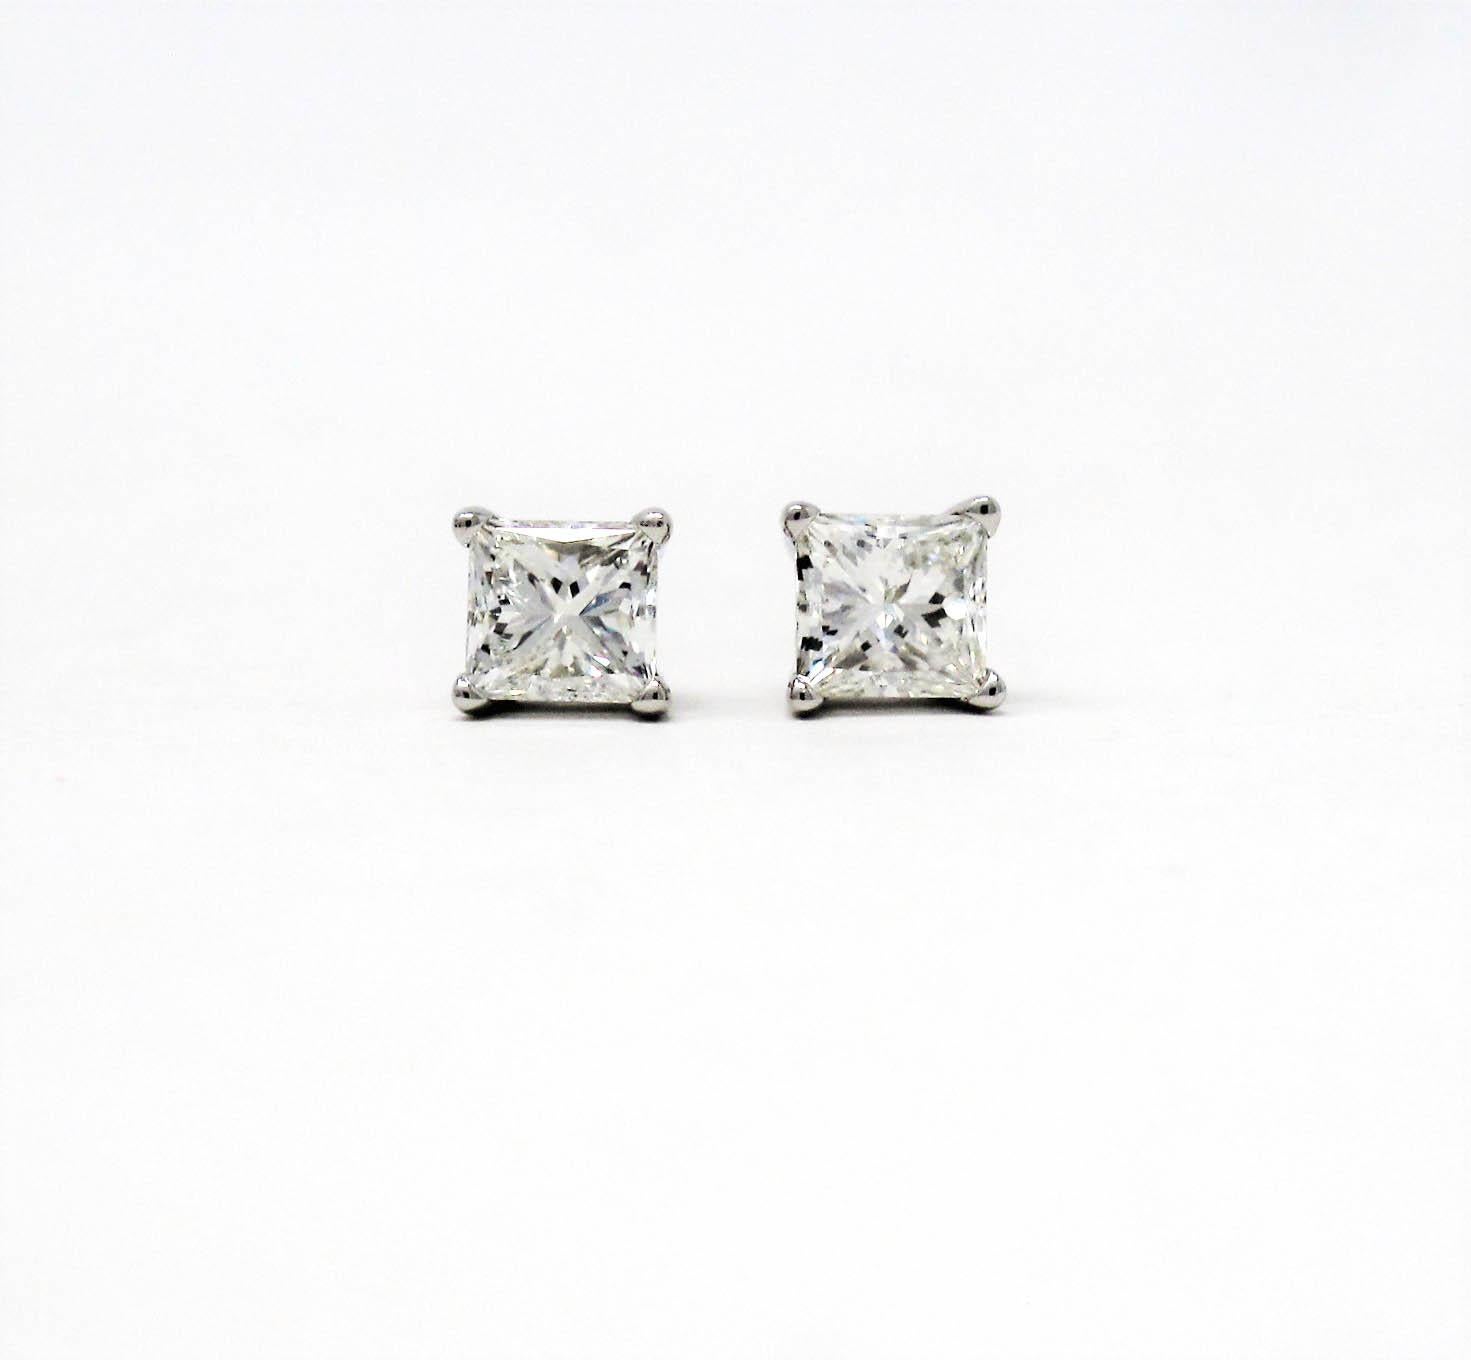 Utterly timeless diamond solitaire stud earrings. These gorgeous square diamond and platinum studs are the epitome of minimalist elegance. The simple yet elegant design can be worn with just about anything, making these your new 'everyday'